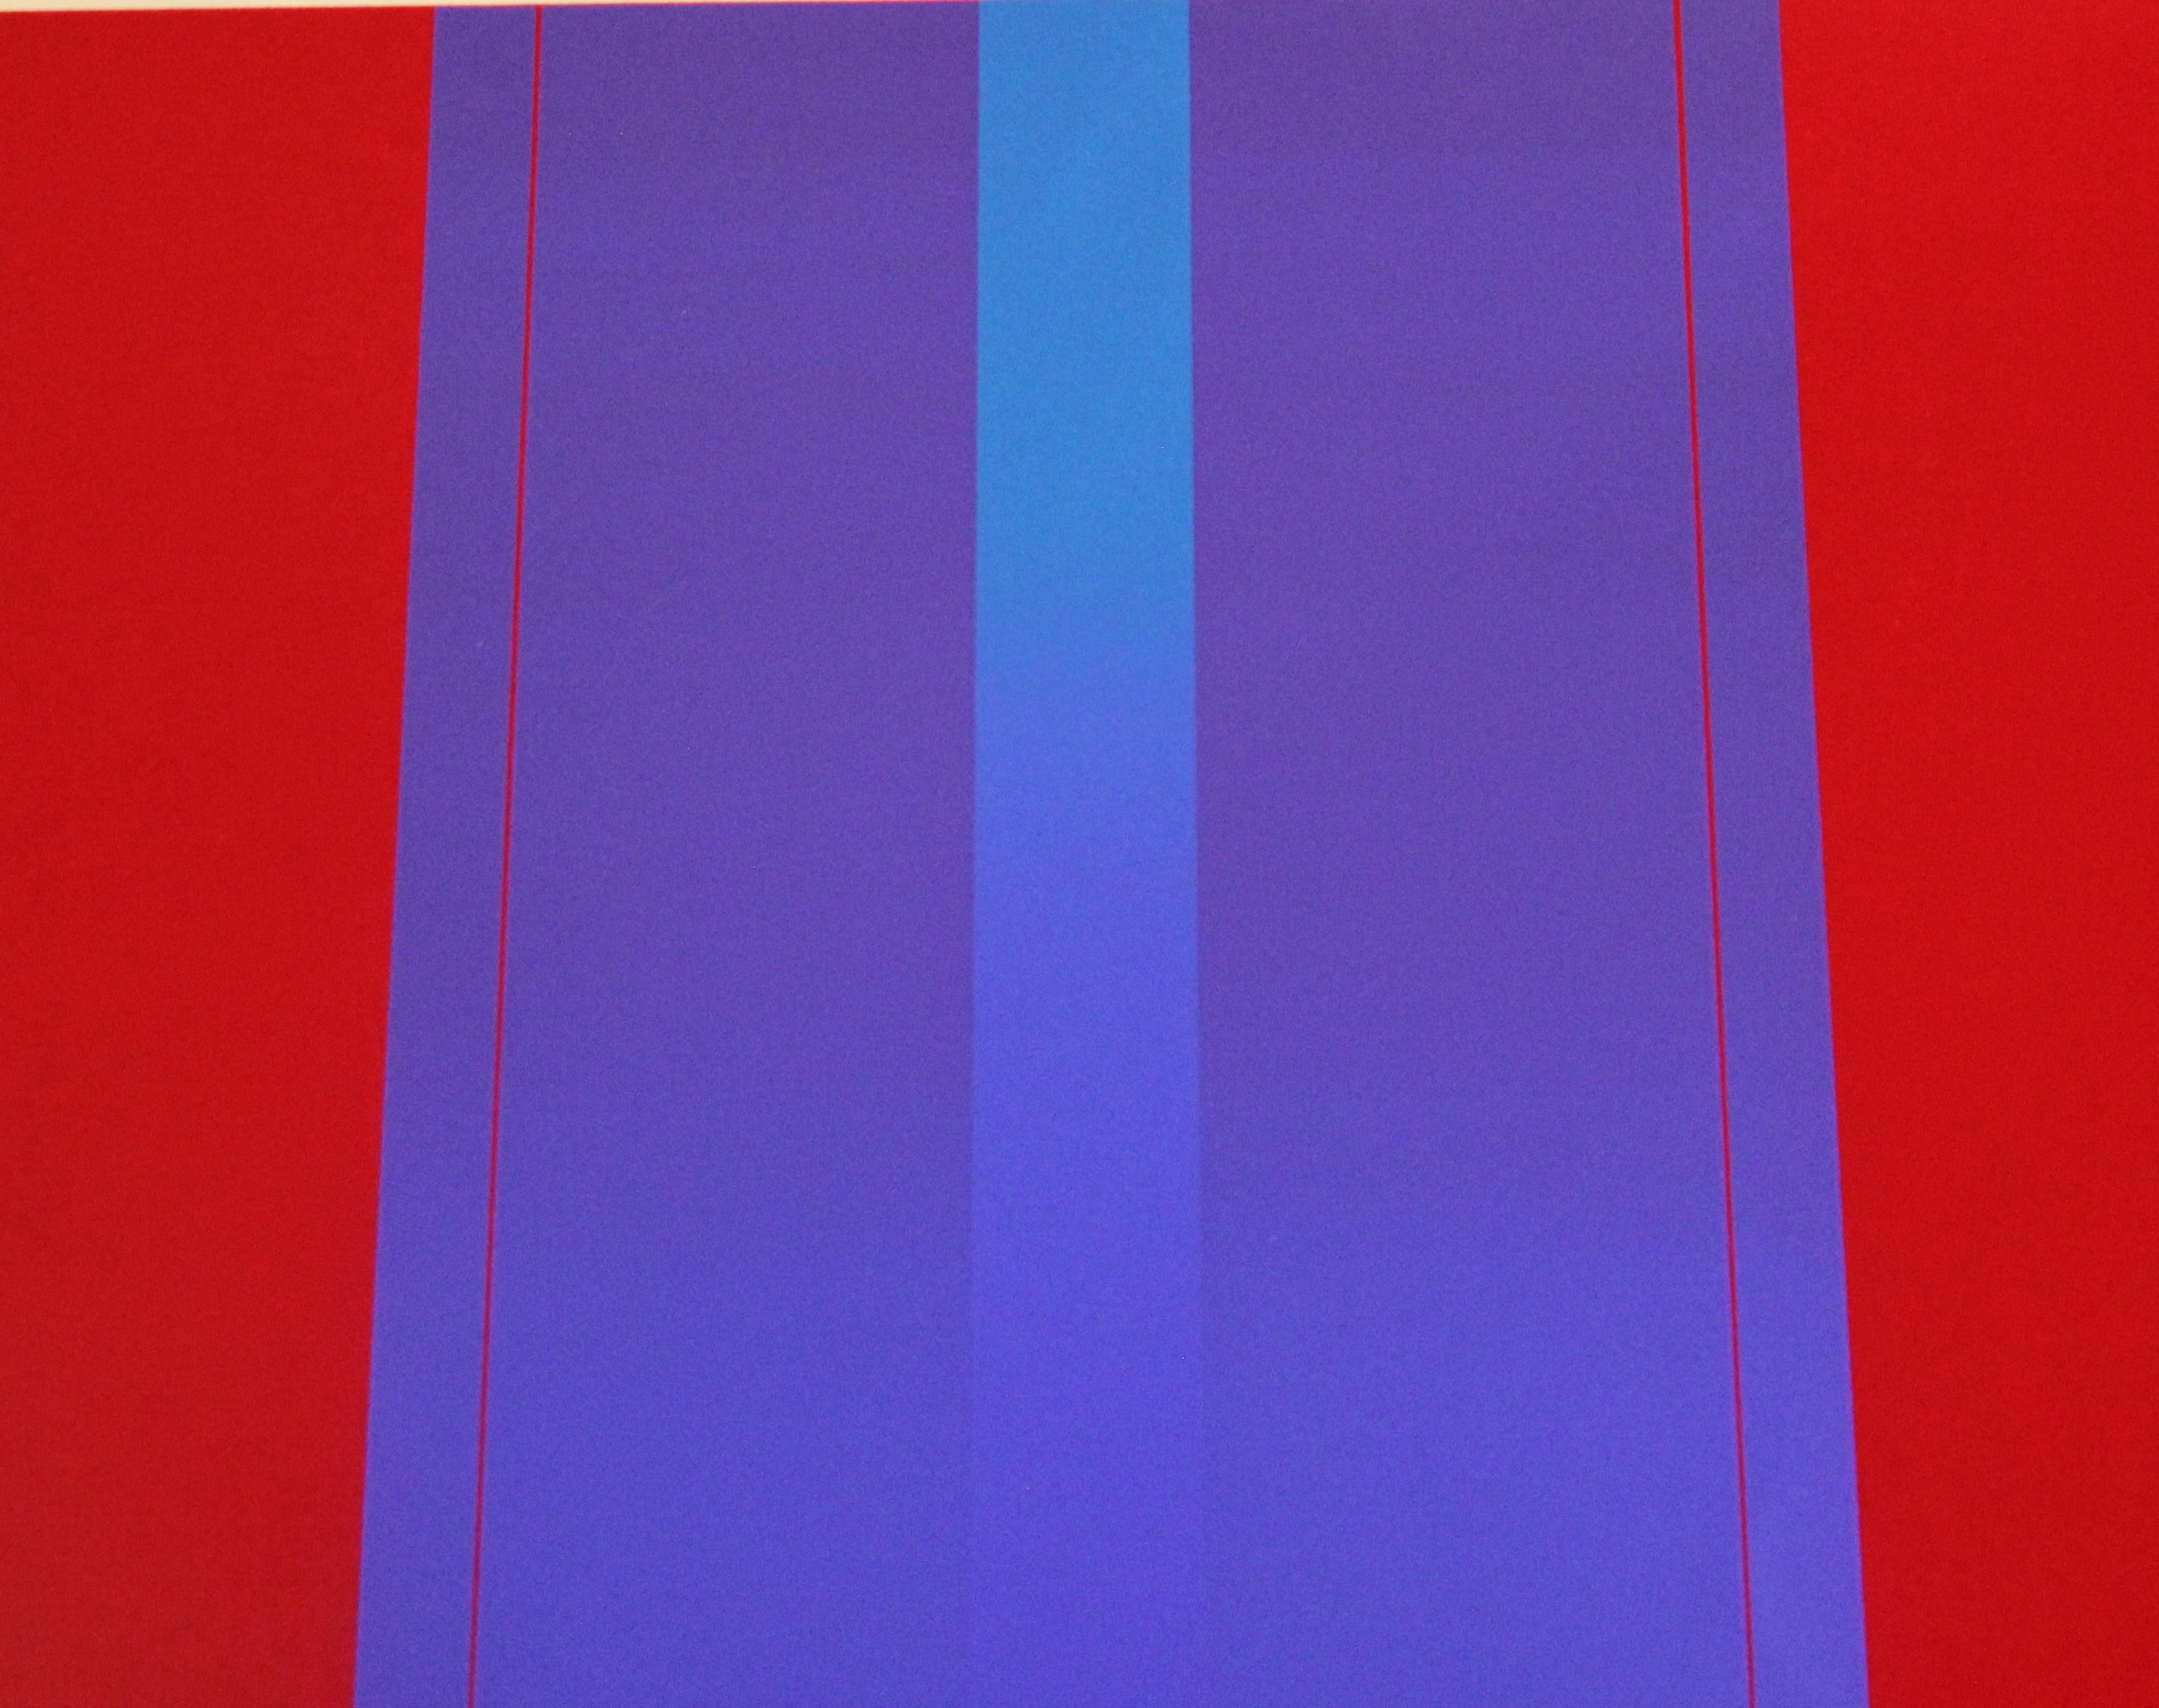 Red and blue linear print that is signed by Marianni. The work is similar to the style of famous artist Bernett Newman who painted strickly colorful paintings with a 